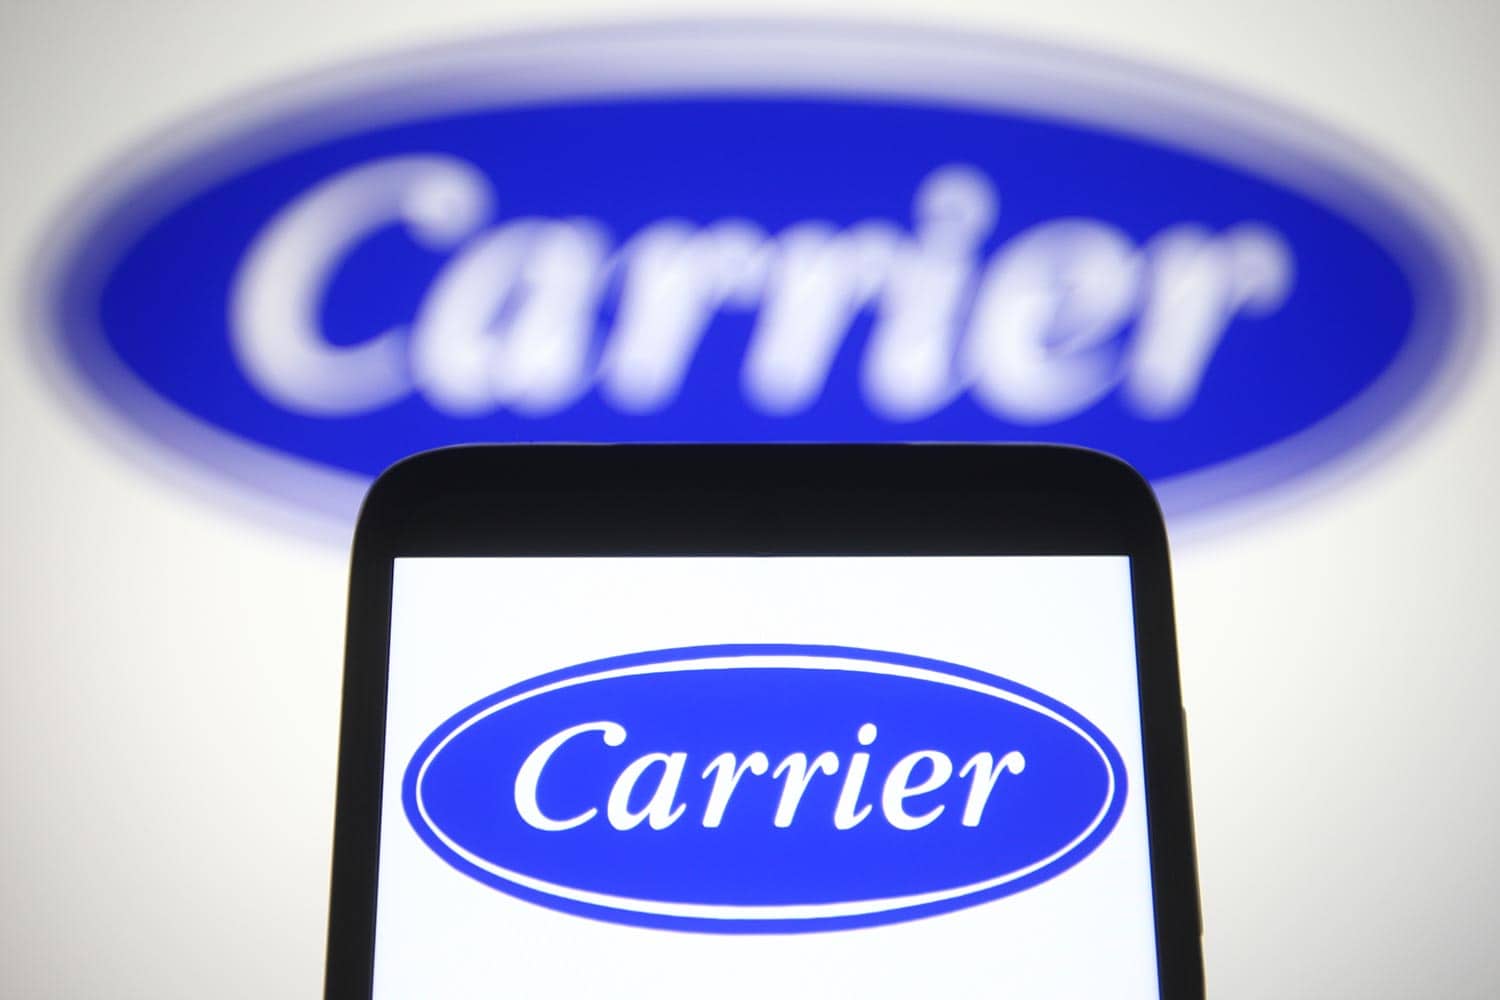 Carrier Global Corporation logo is seen on a mobile phone and a computer screen